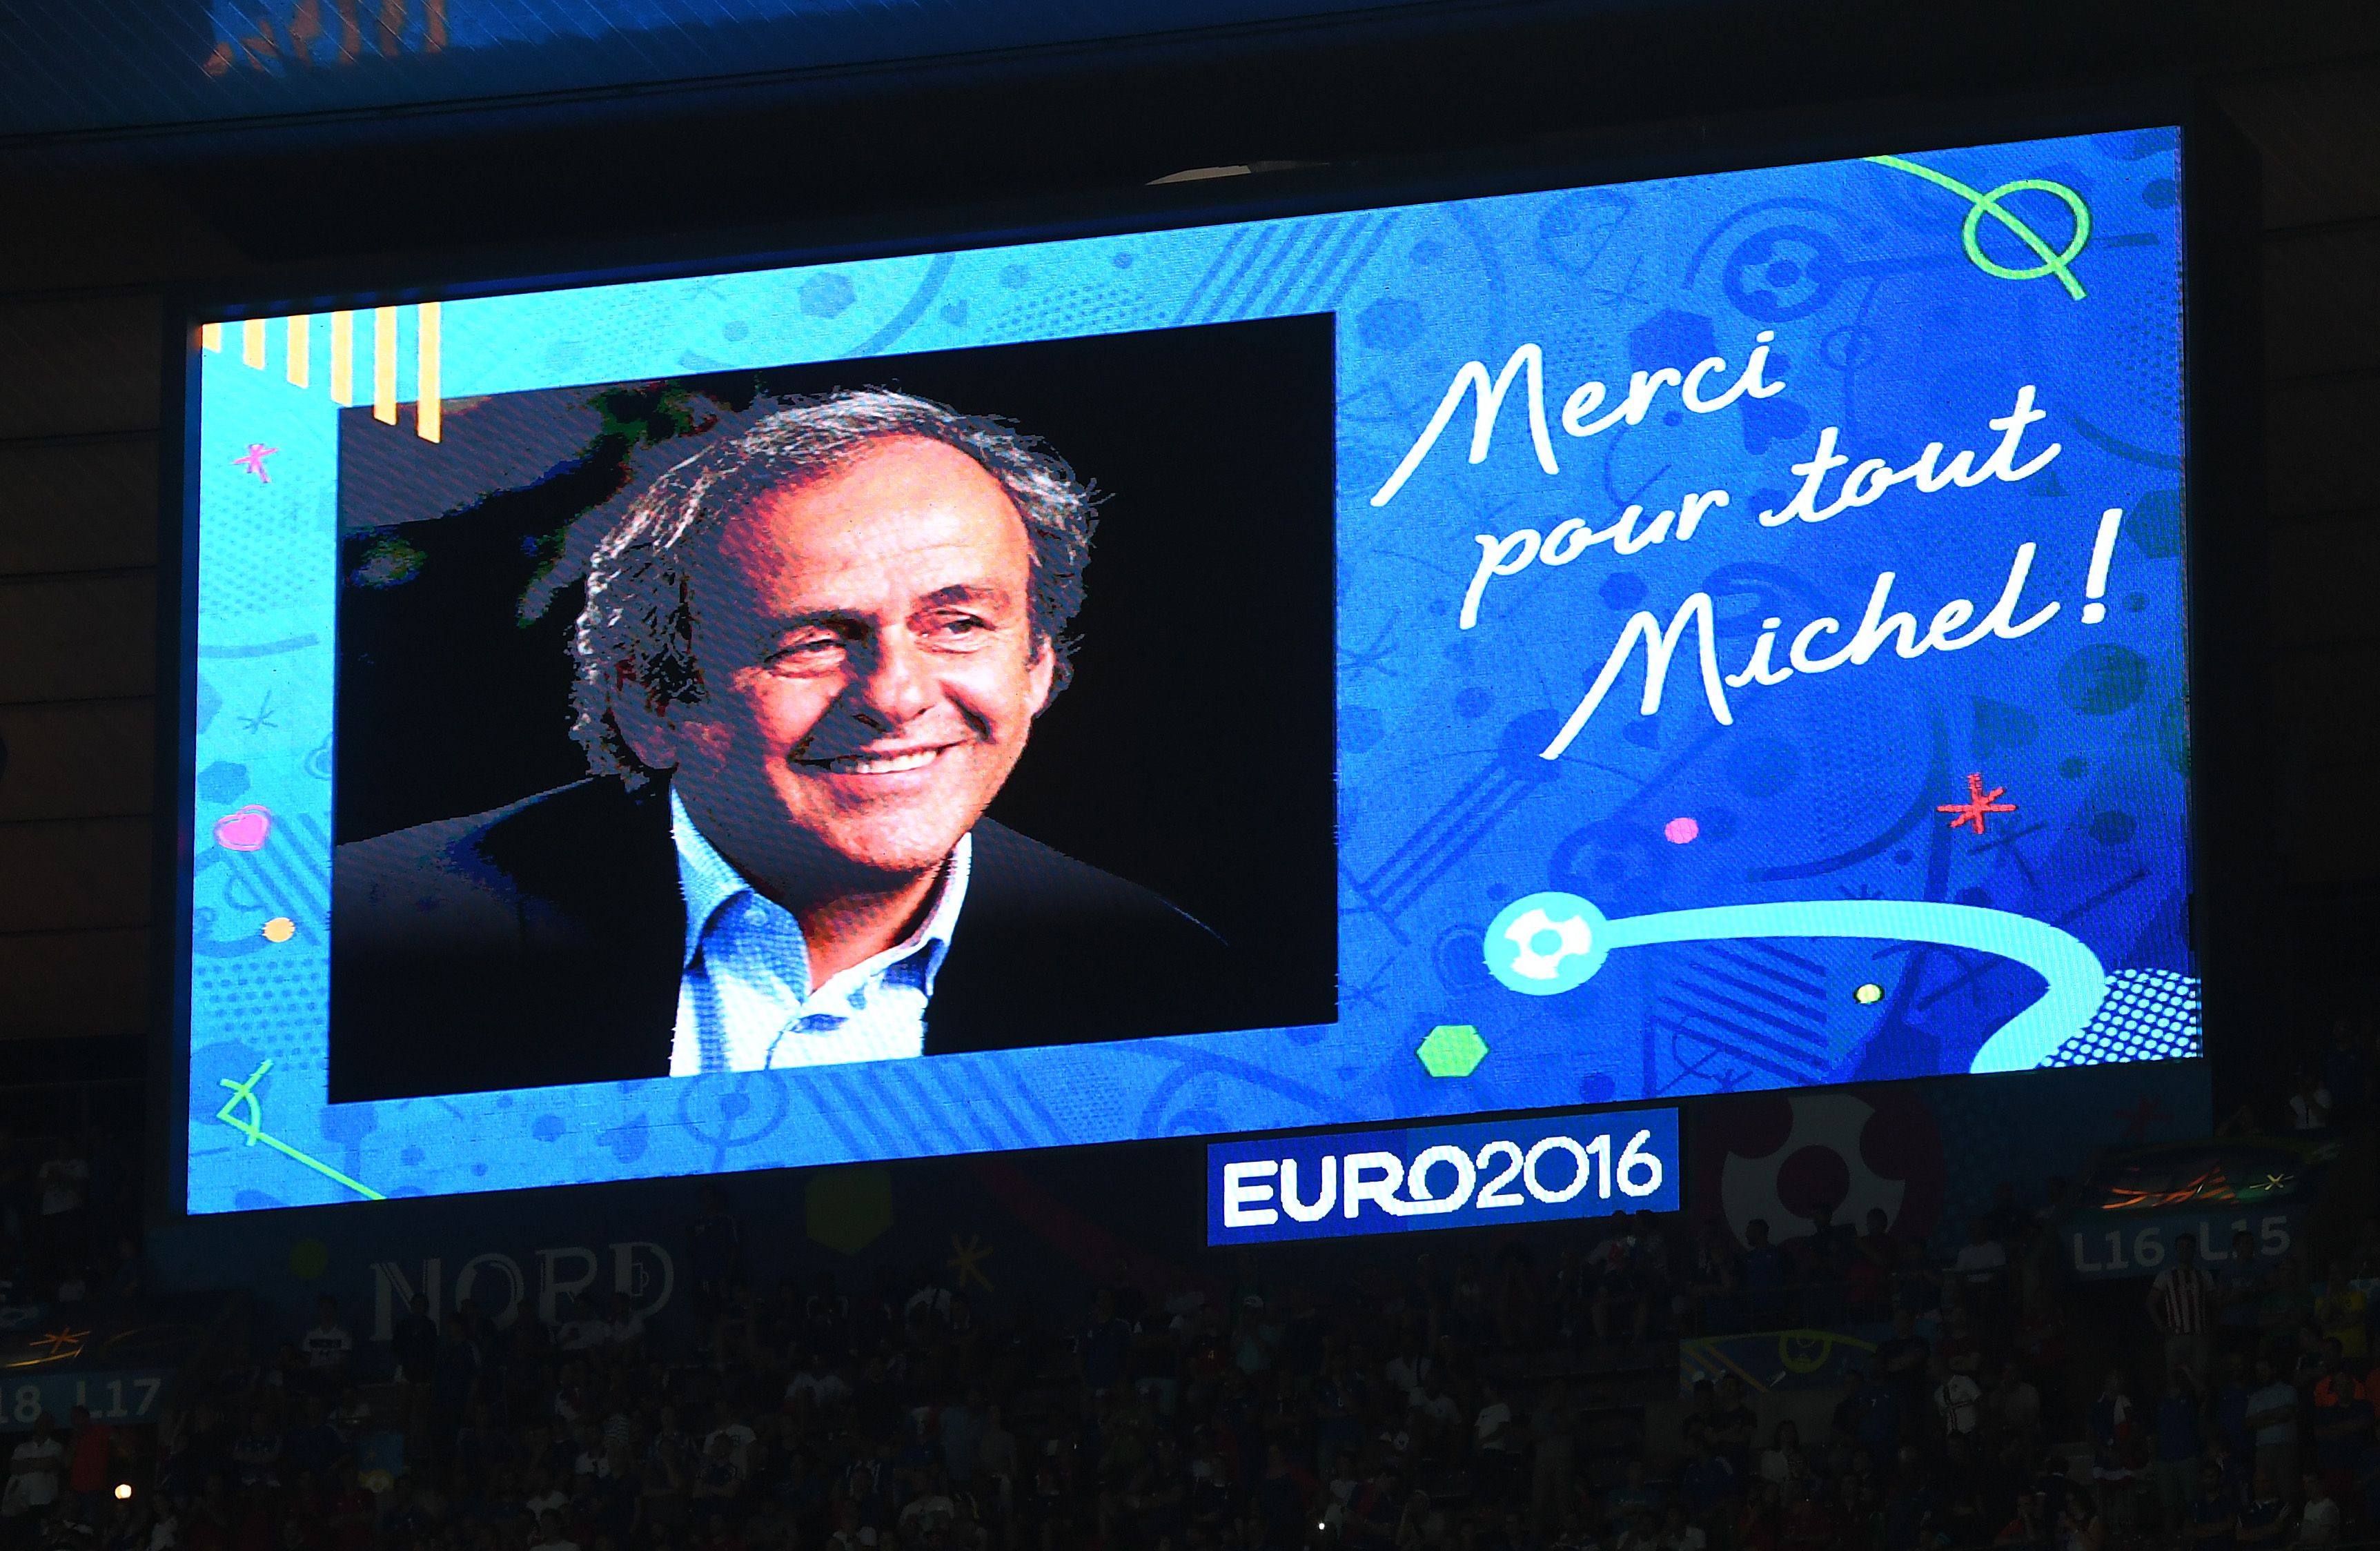 PARIS, FRANCE - JULY 10: A message on the big screen in the stadium from Former french international and Suspended UEFA president Michel Platini is seen during the UEFA EURO 2016 Final match between Portugal and France at Stade de France on July 10, 2016 in Paris, France. (Photo by Michael Regan/Getty Images)